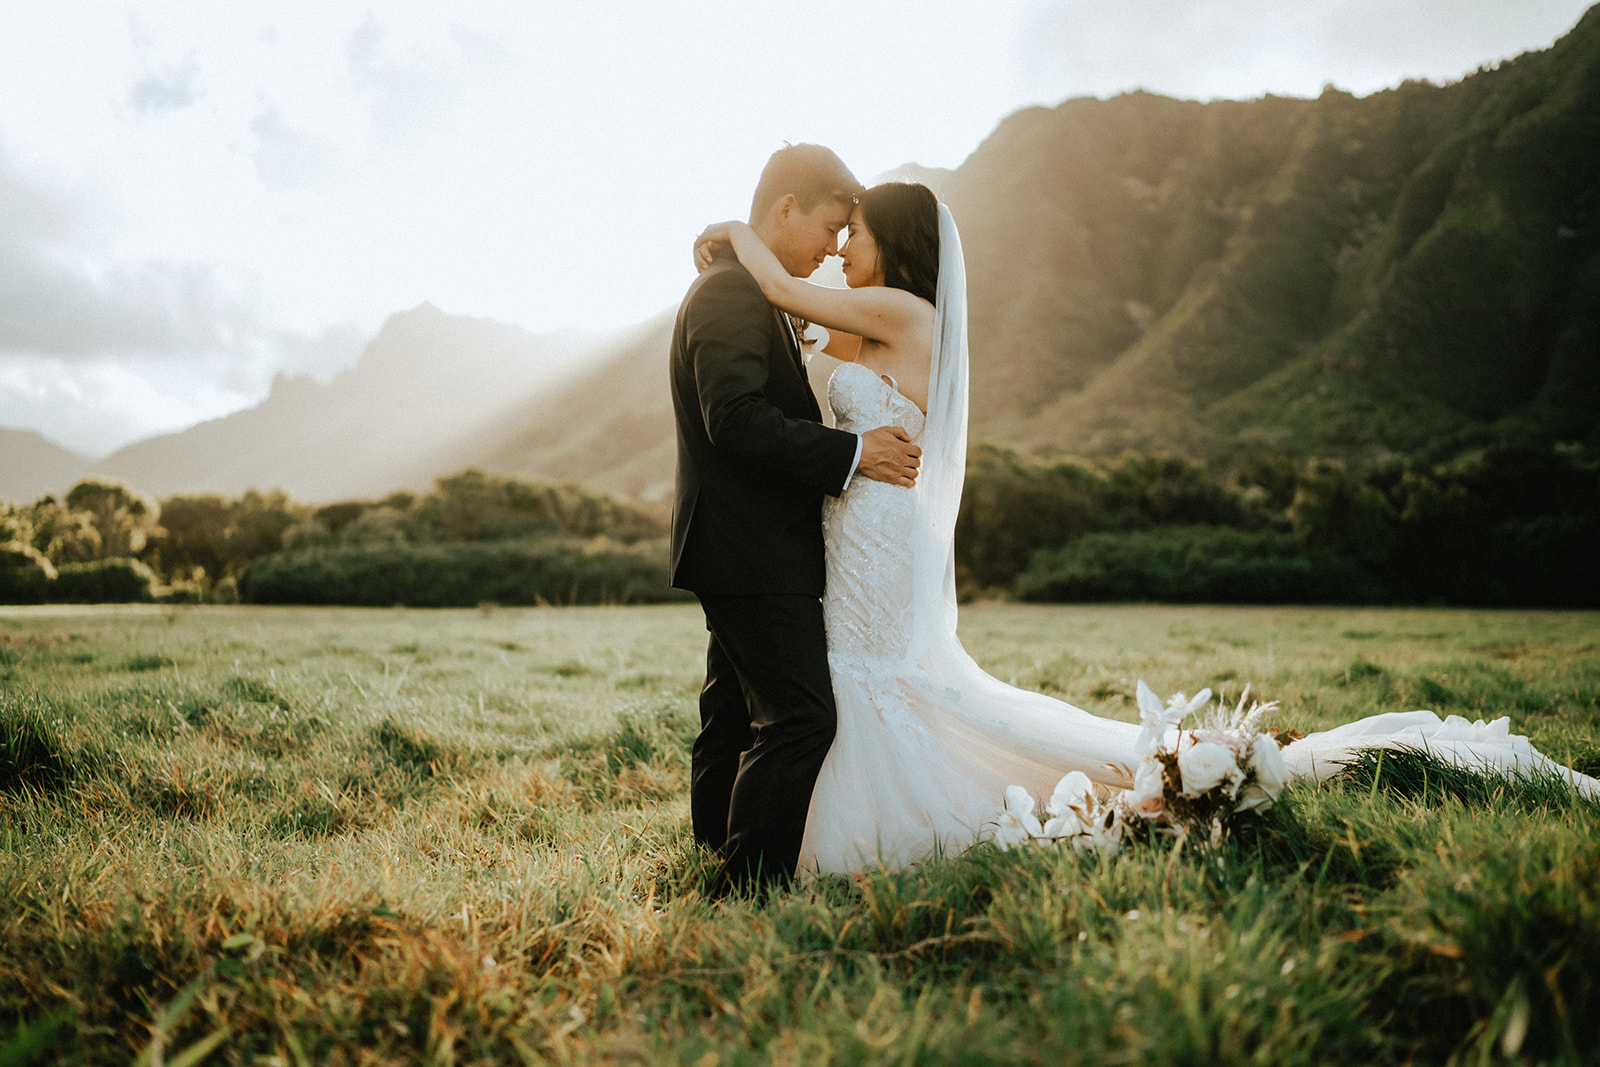 A couple after the wedding in Kualoa Ranch